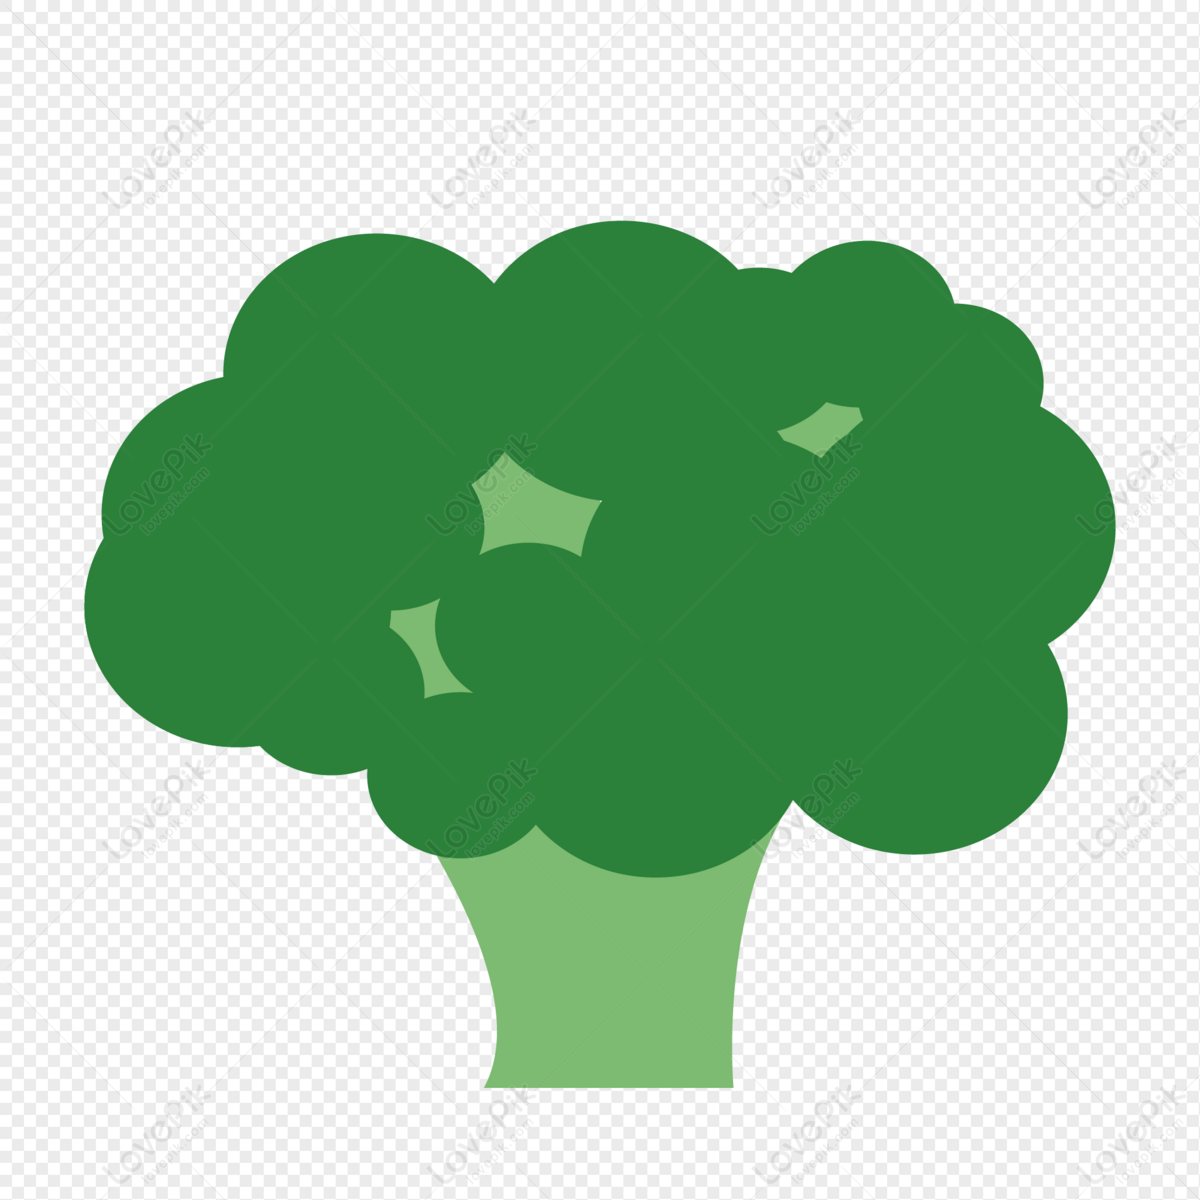 Cartoon Broccoli Images, HD Pictures For Free Vectors Download 